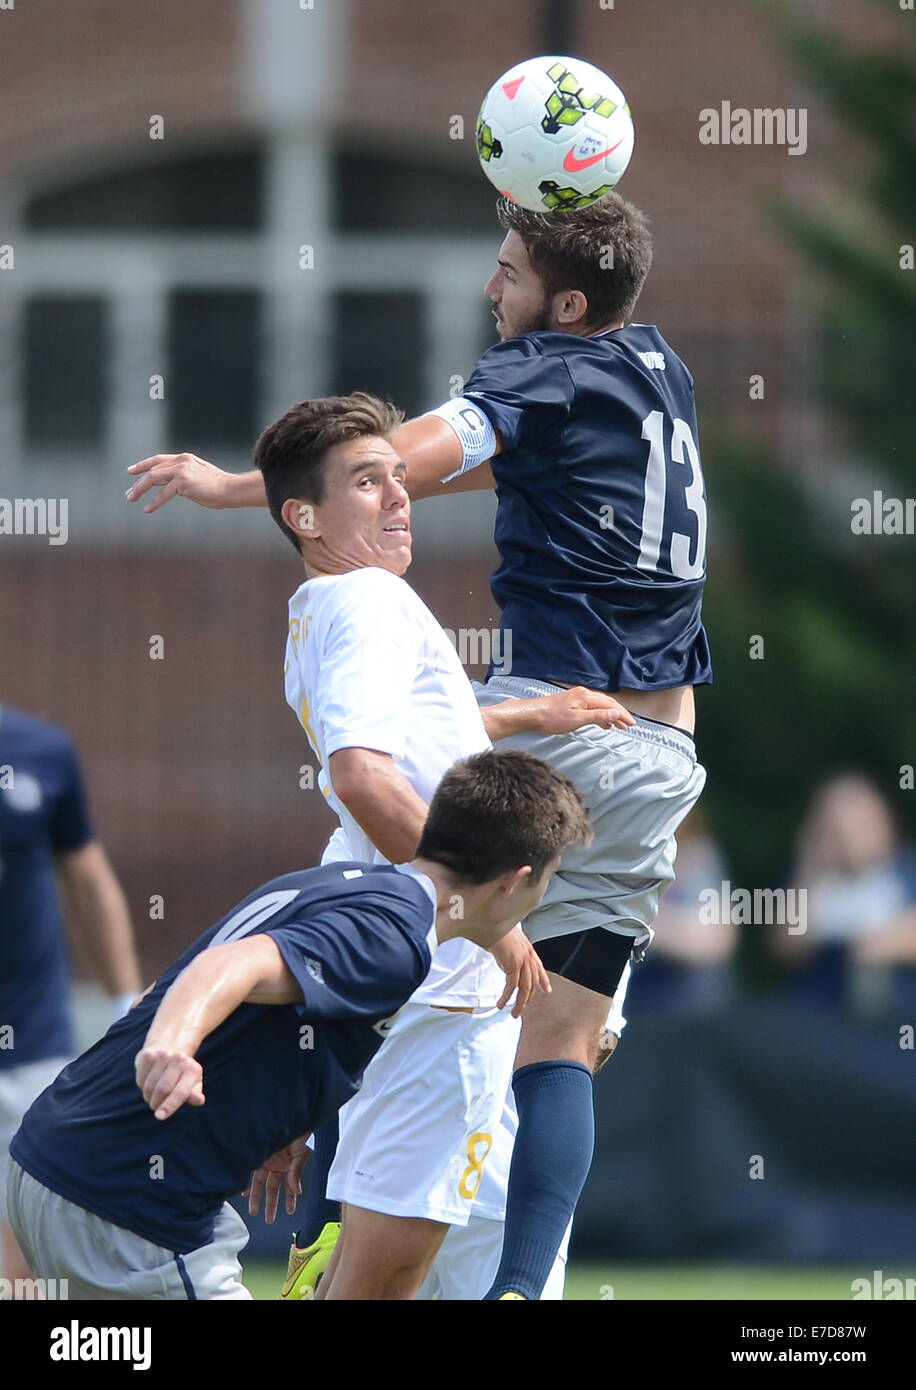 Washington, DC, USA. 14th Sep, 2014. 20140914 - Georgetown midfielder Tyler Rudy (13) heads the ball over UC Irvine midfielder Mats Bjurman (8) and Georgetown forward Alex Muyl (9), lower left, in the first half of an NCAA men's soccer match at Shaw Field in Washington. Georgetown and UCI tied 1-1 in double overtime. © Chuck Myers/ZUMA Wire/Alamy Live News Stock Photo